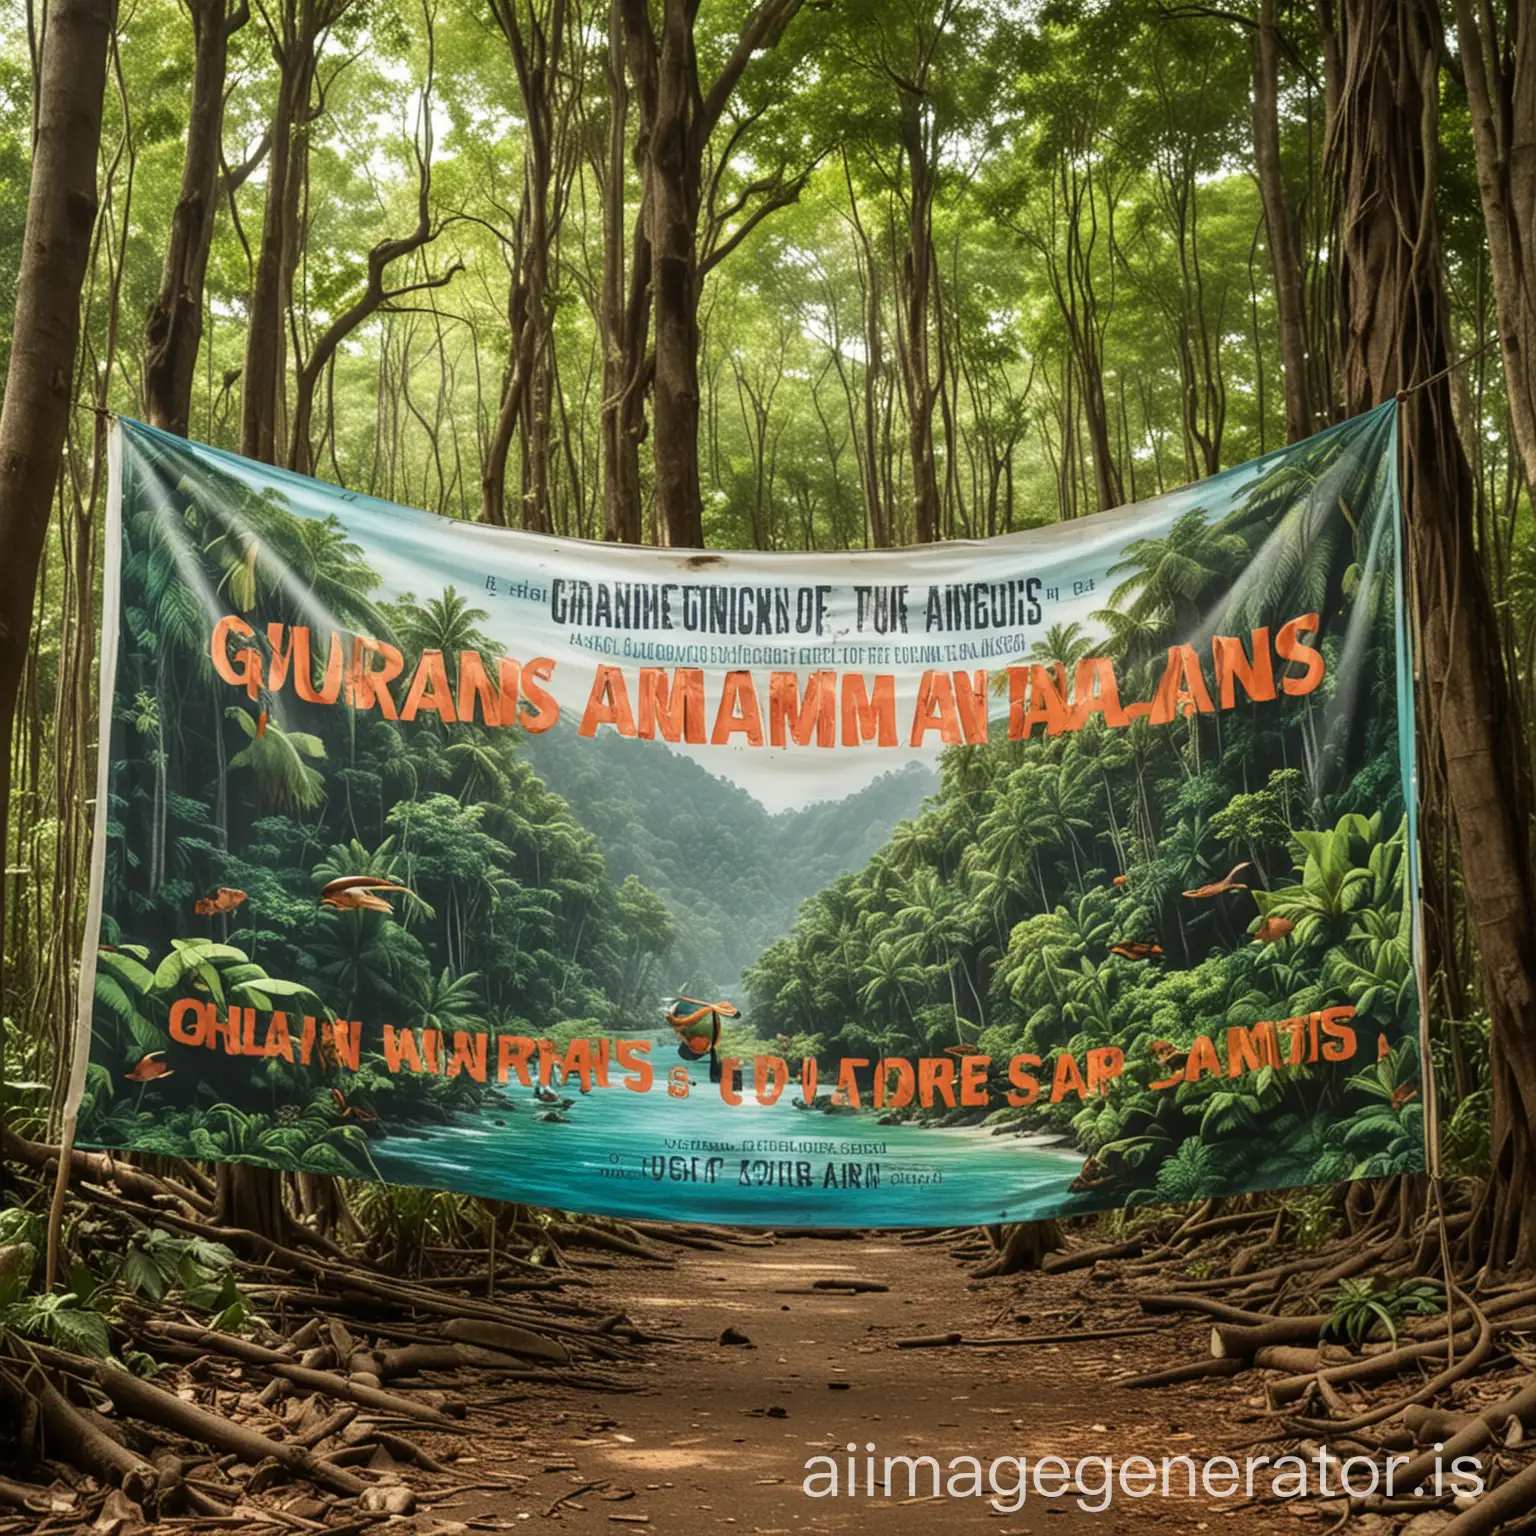 Scene of the beautiful Andaman and Nicobar Islands, lush forests, and vibrant coral reefs. A banner at the top reads: 'Guardians of the Andaman and Nicobar Islands offshore development's